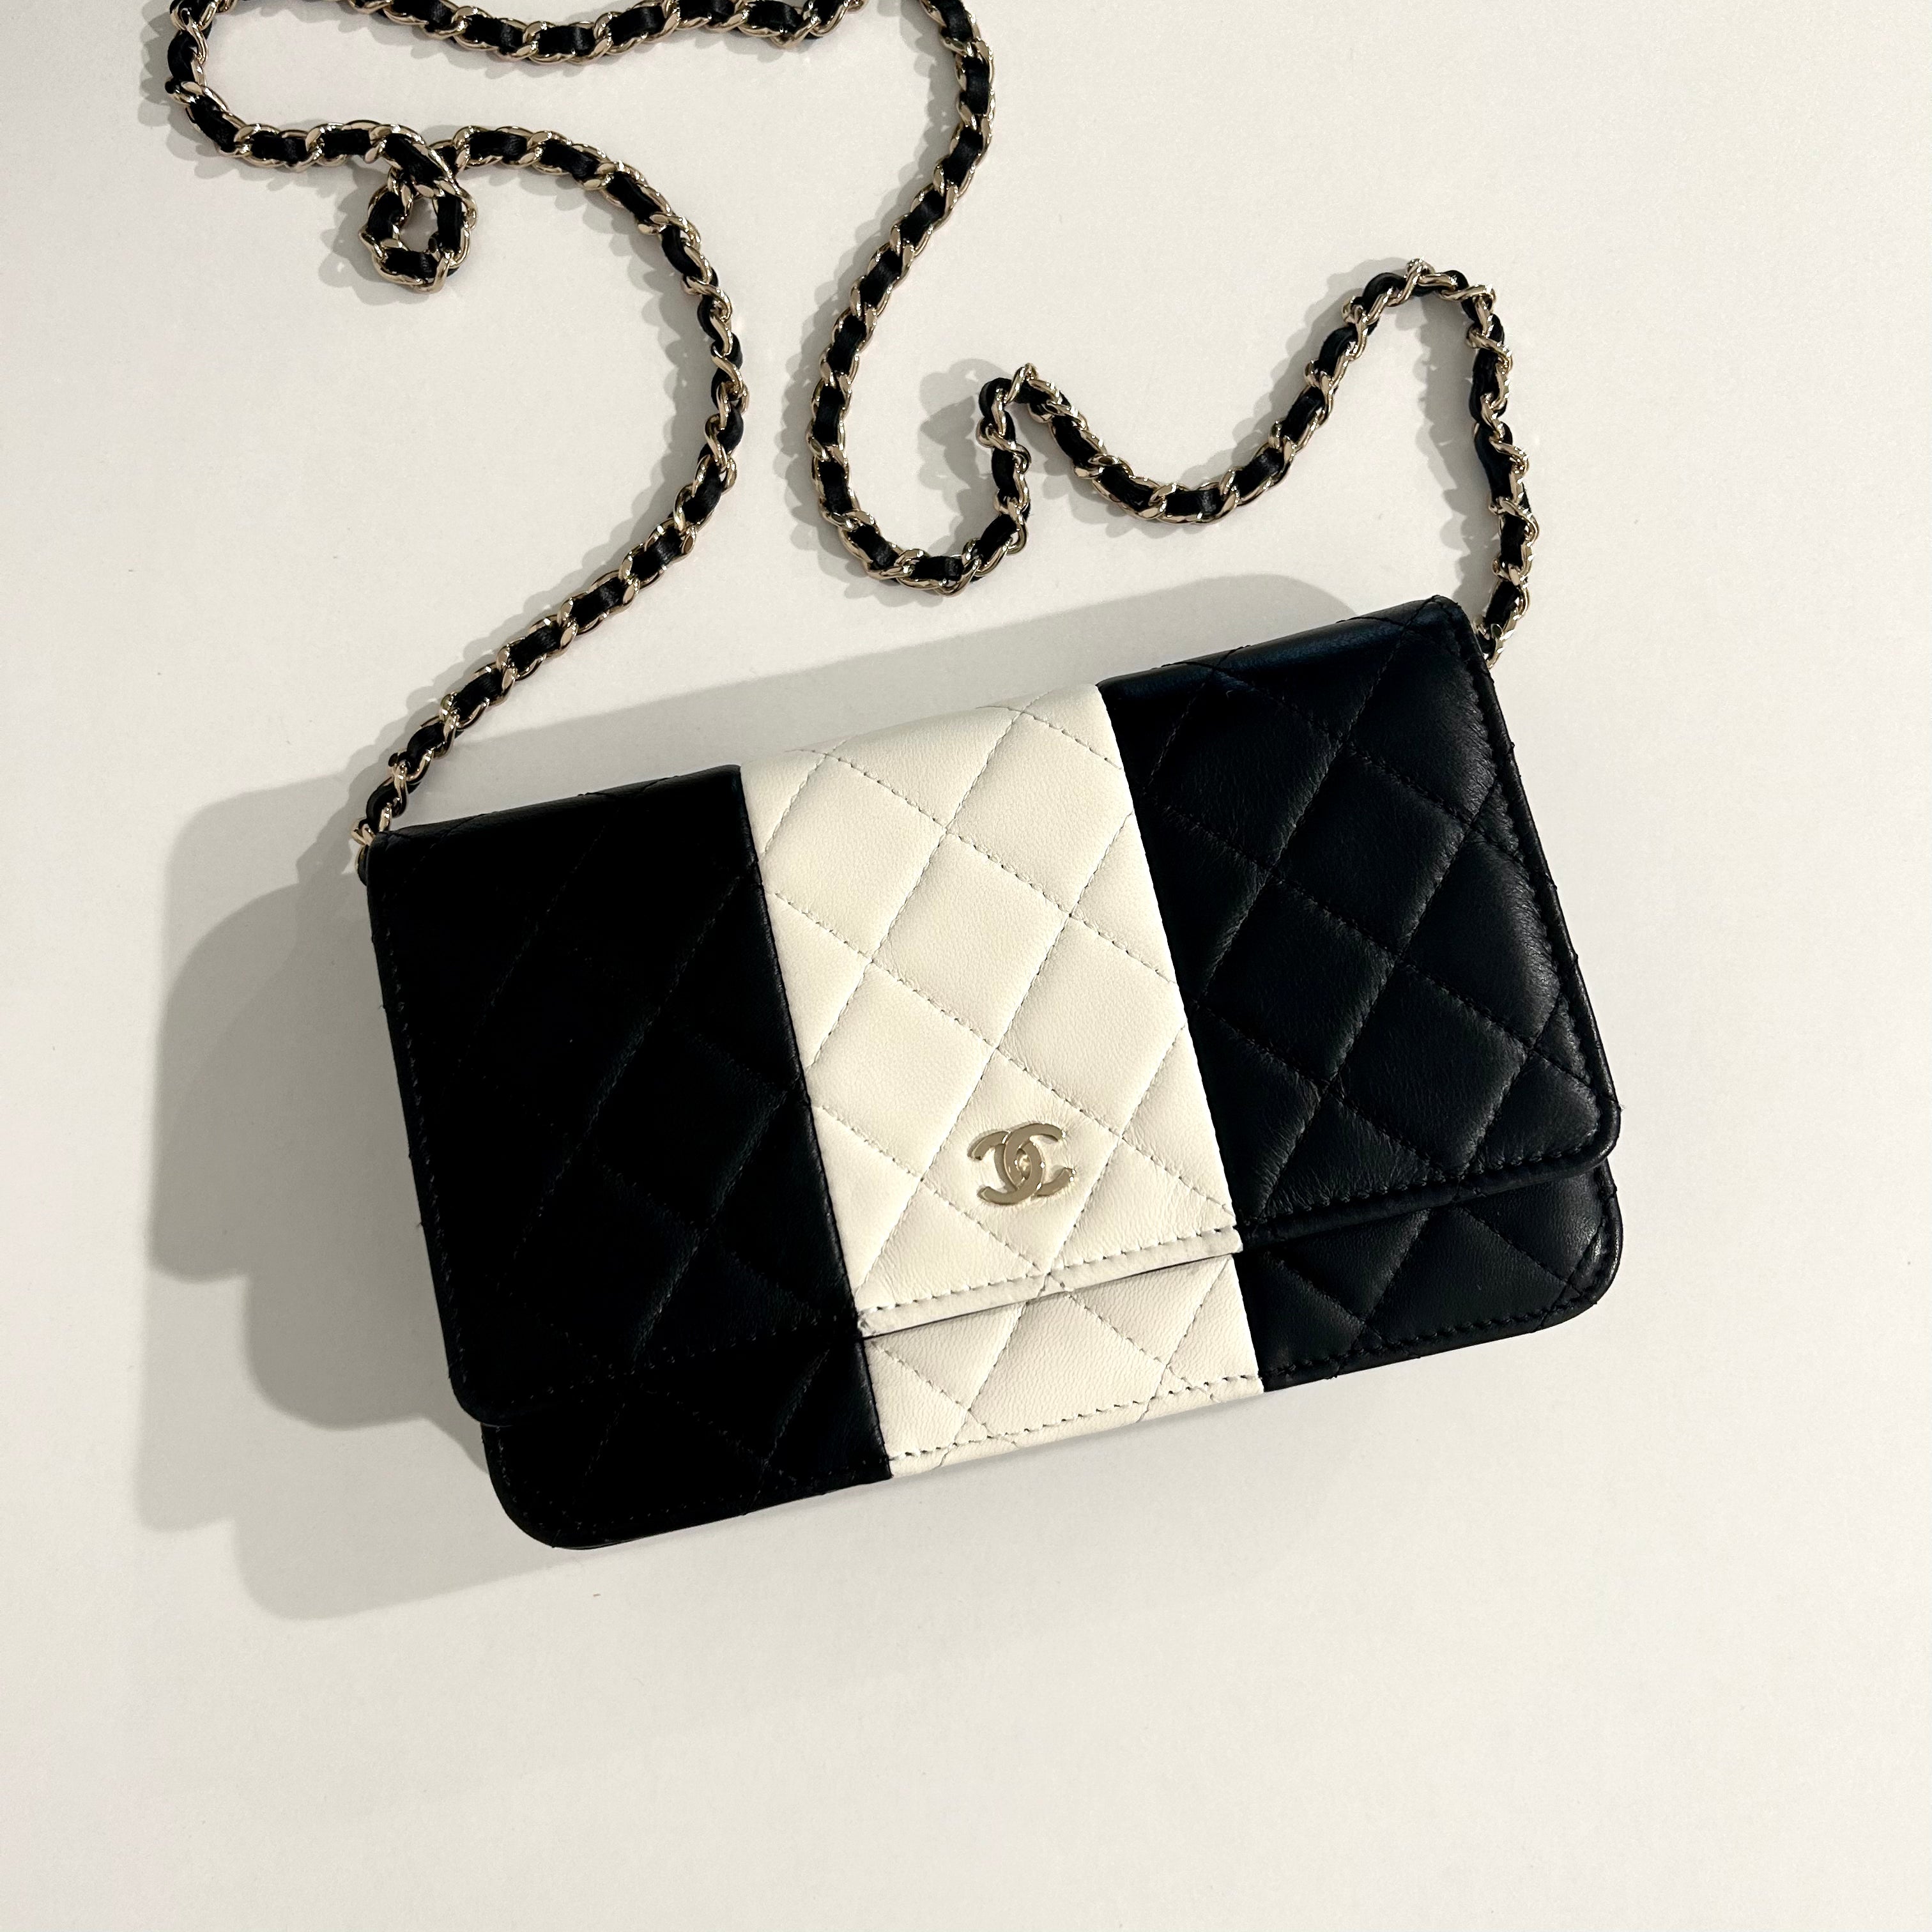 Chanel Black & White Wallet on Chain